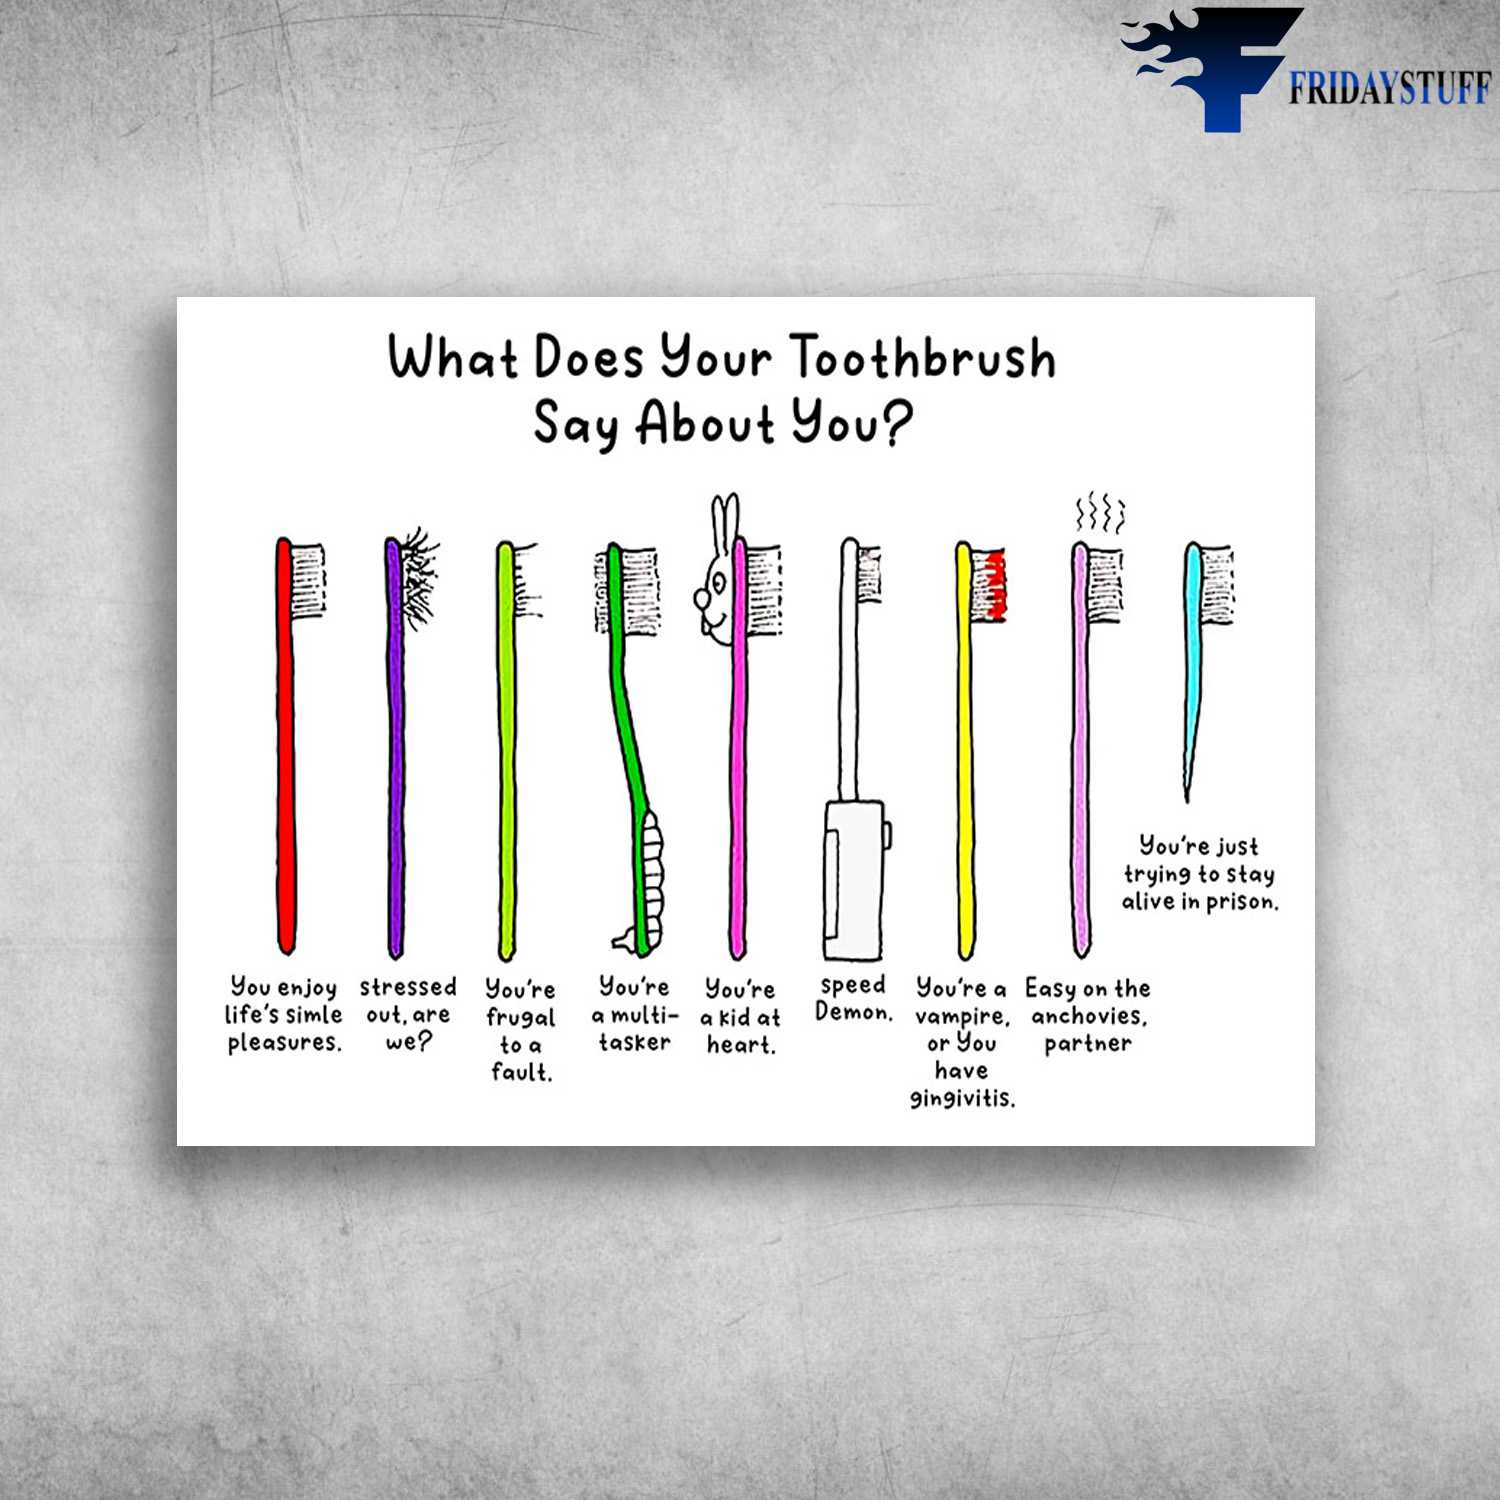 Teeth Care - What Does Your Toothbrush, Say About You, You Enjoy Life's Smile Pleasures, Stressed Out, Are We, You're Frugal To A Fault, You're A Multi-Tasker